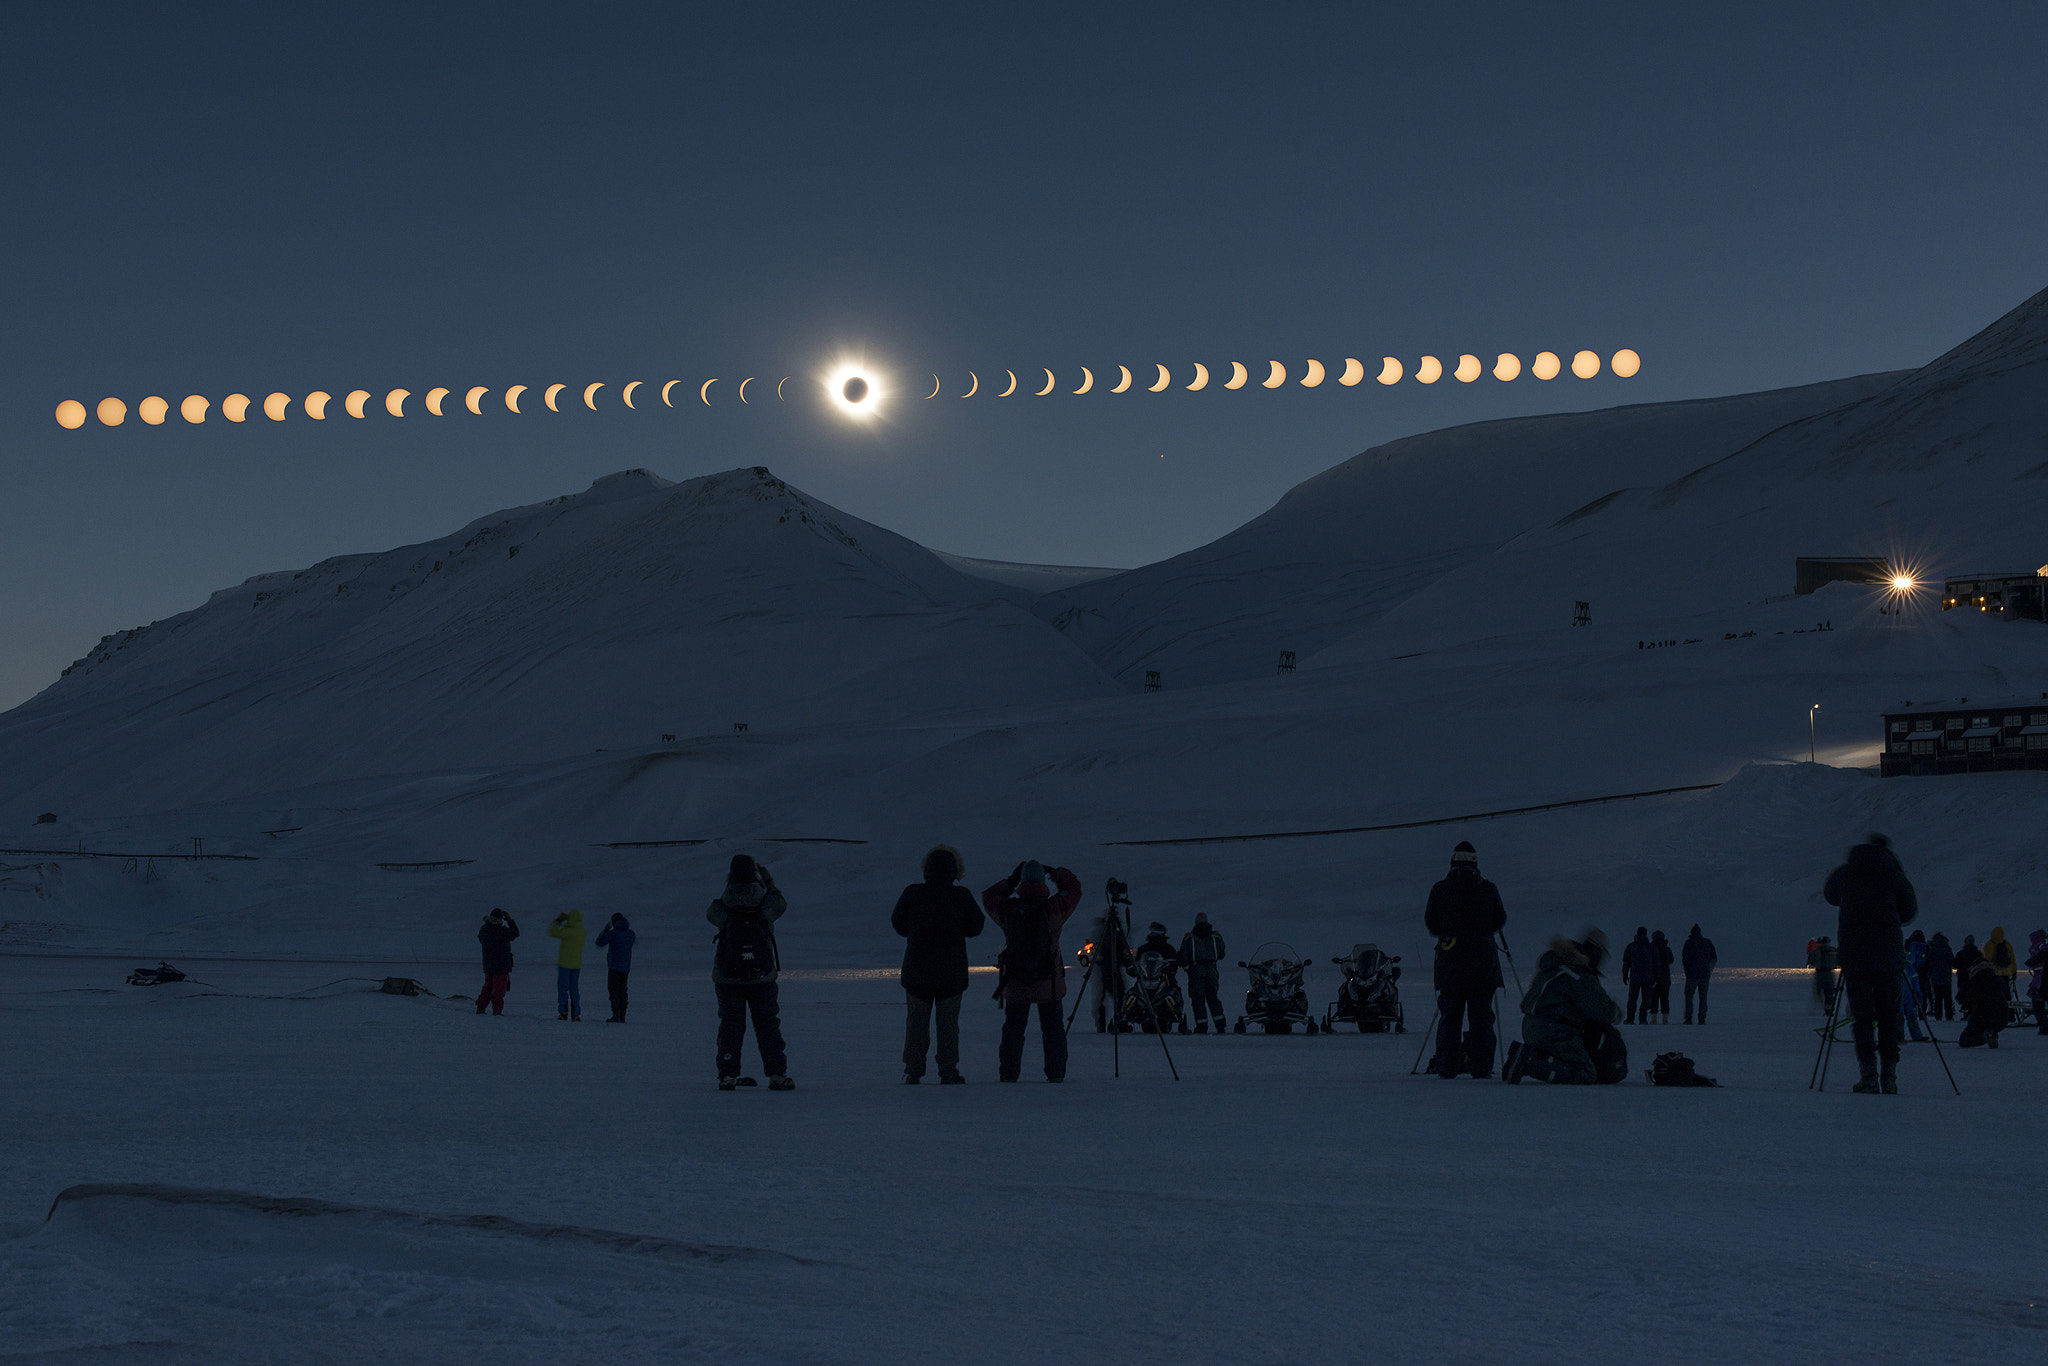 5 Videos to Watch Before Photographing the Eclipse